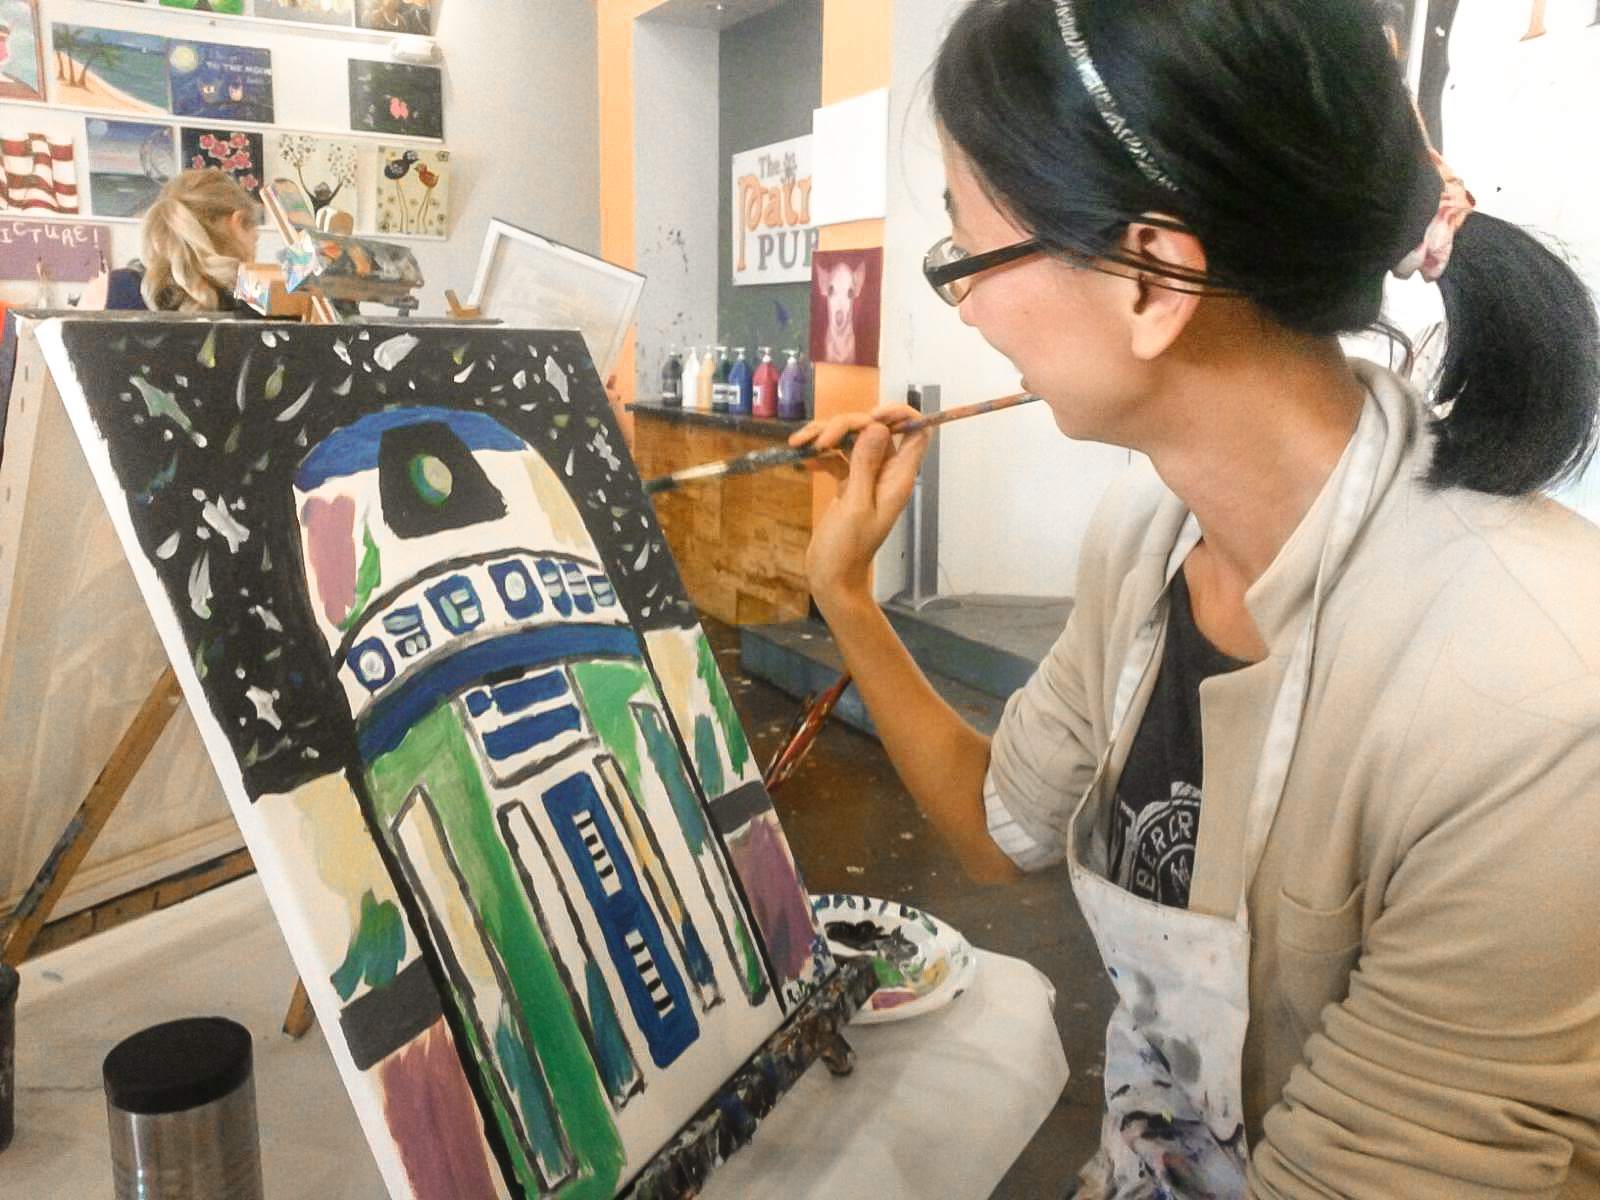 Photo: Xiaodong Ma painting R2D2 at The Paint Pub. Photo Courtesy of Rios Desdamona.